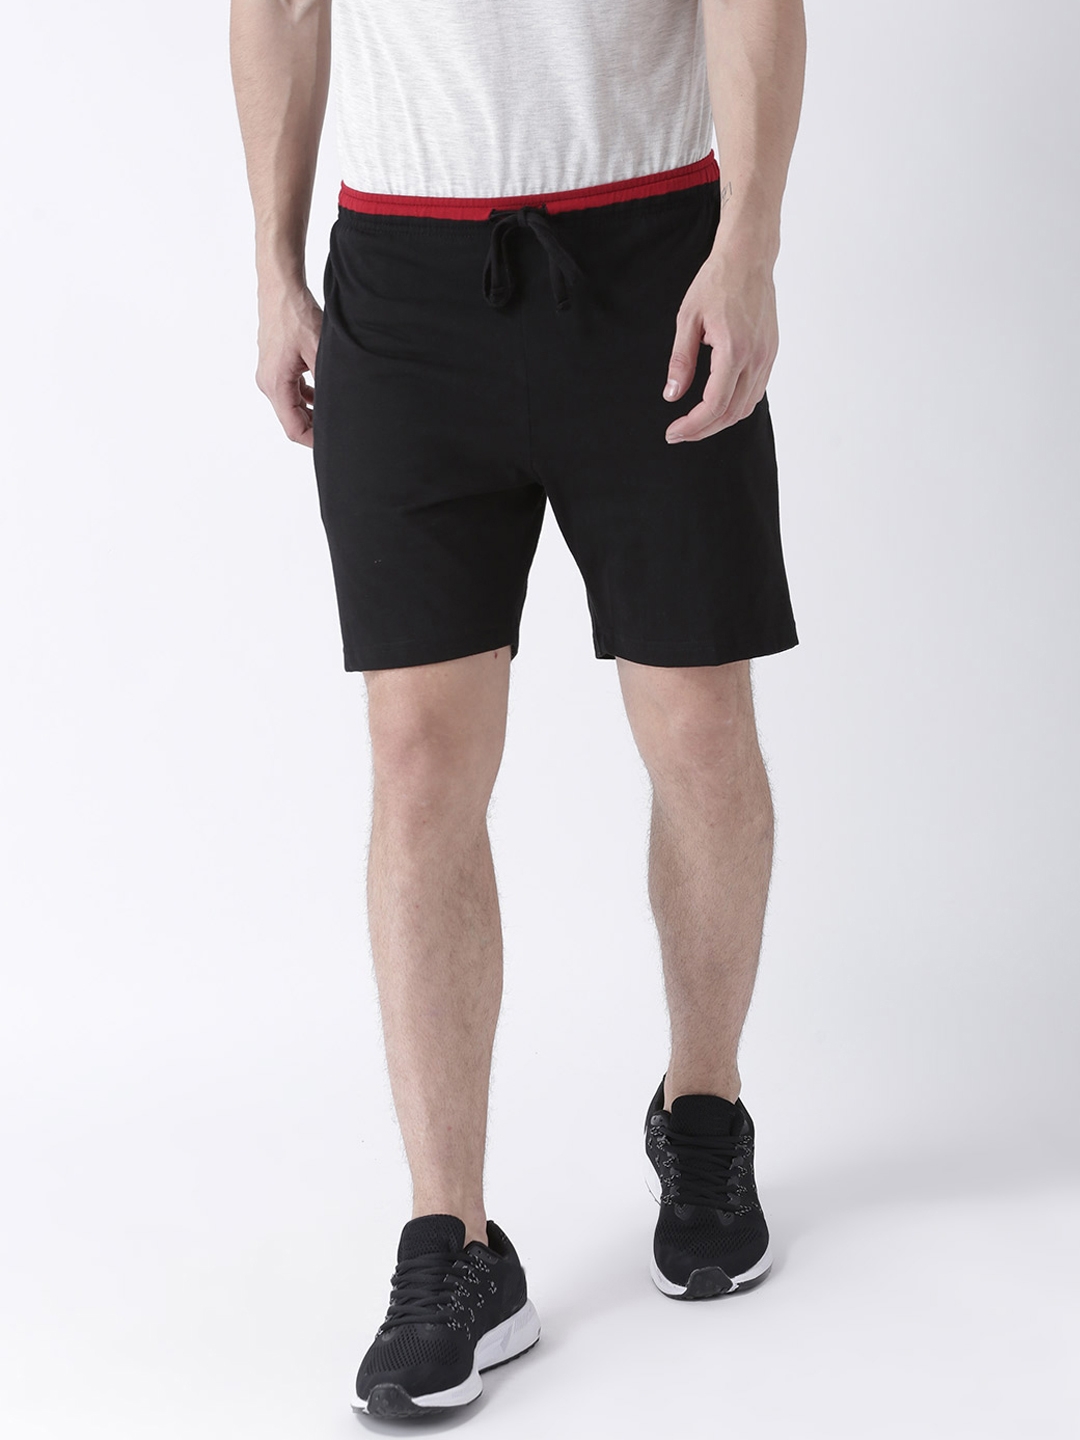 Flat 70% Off on Men's Shorts, Starts @ Rs.329